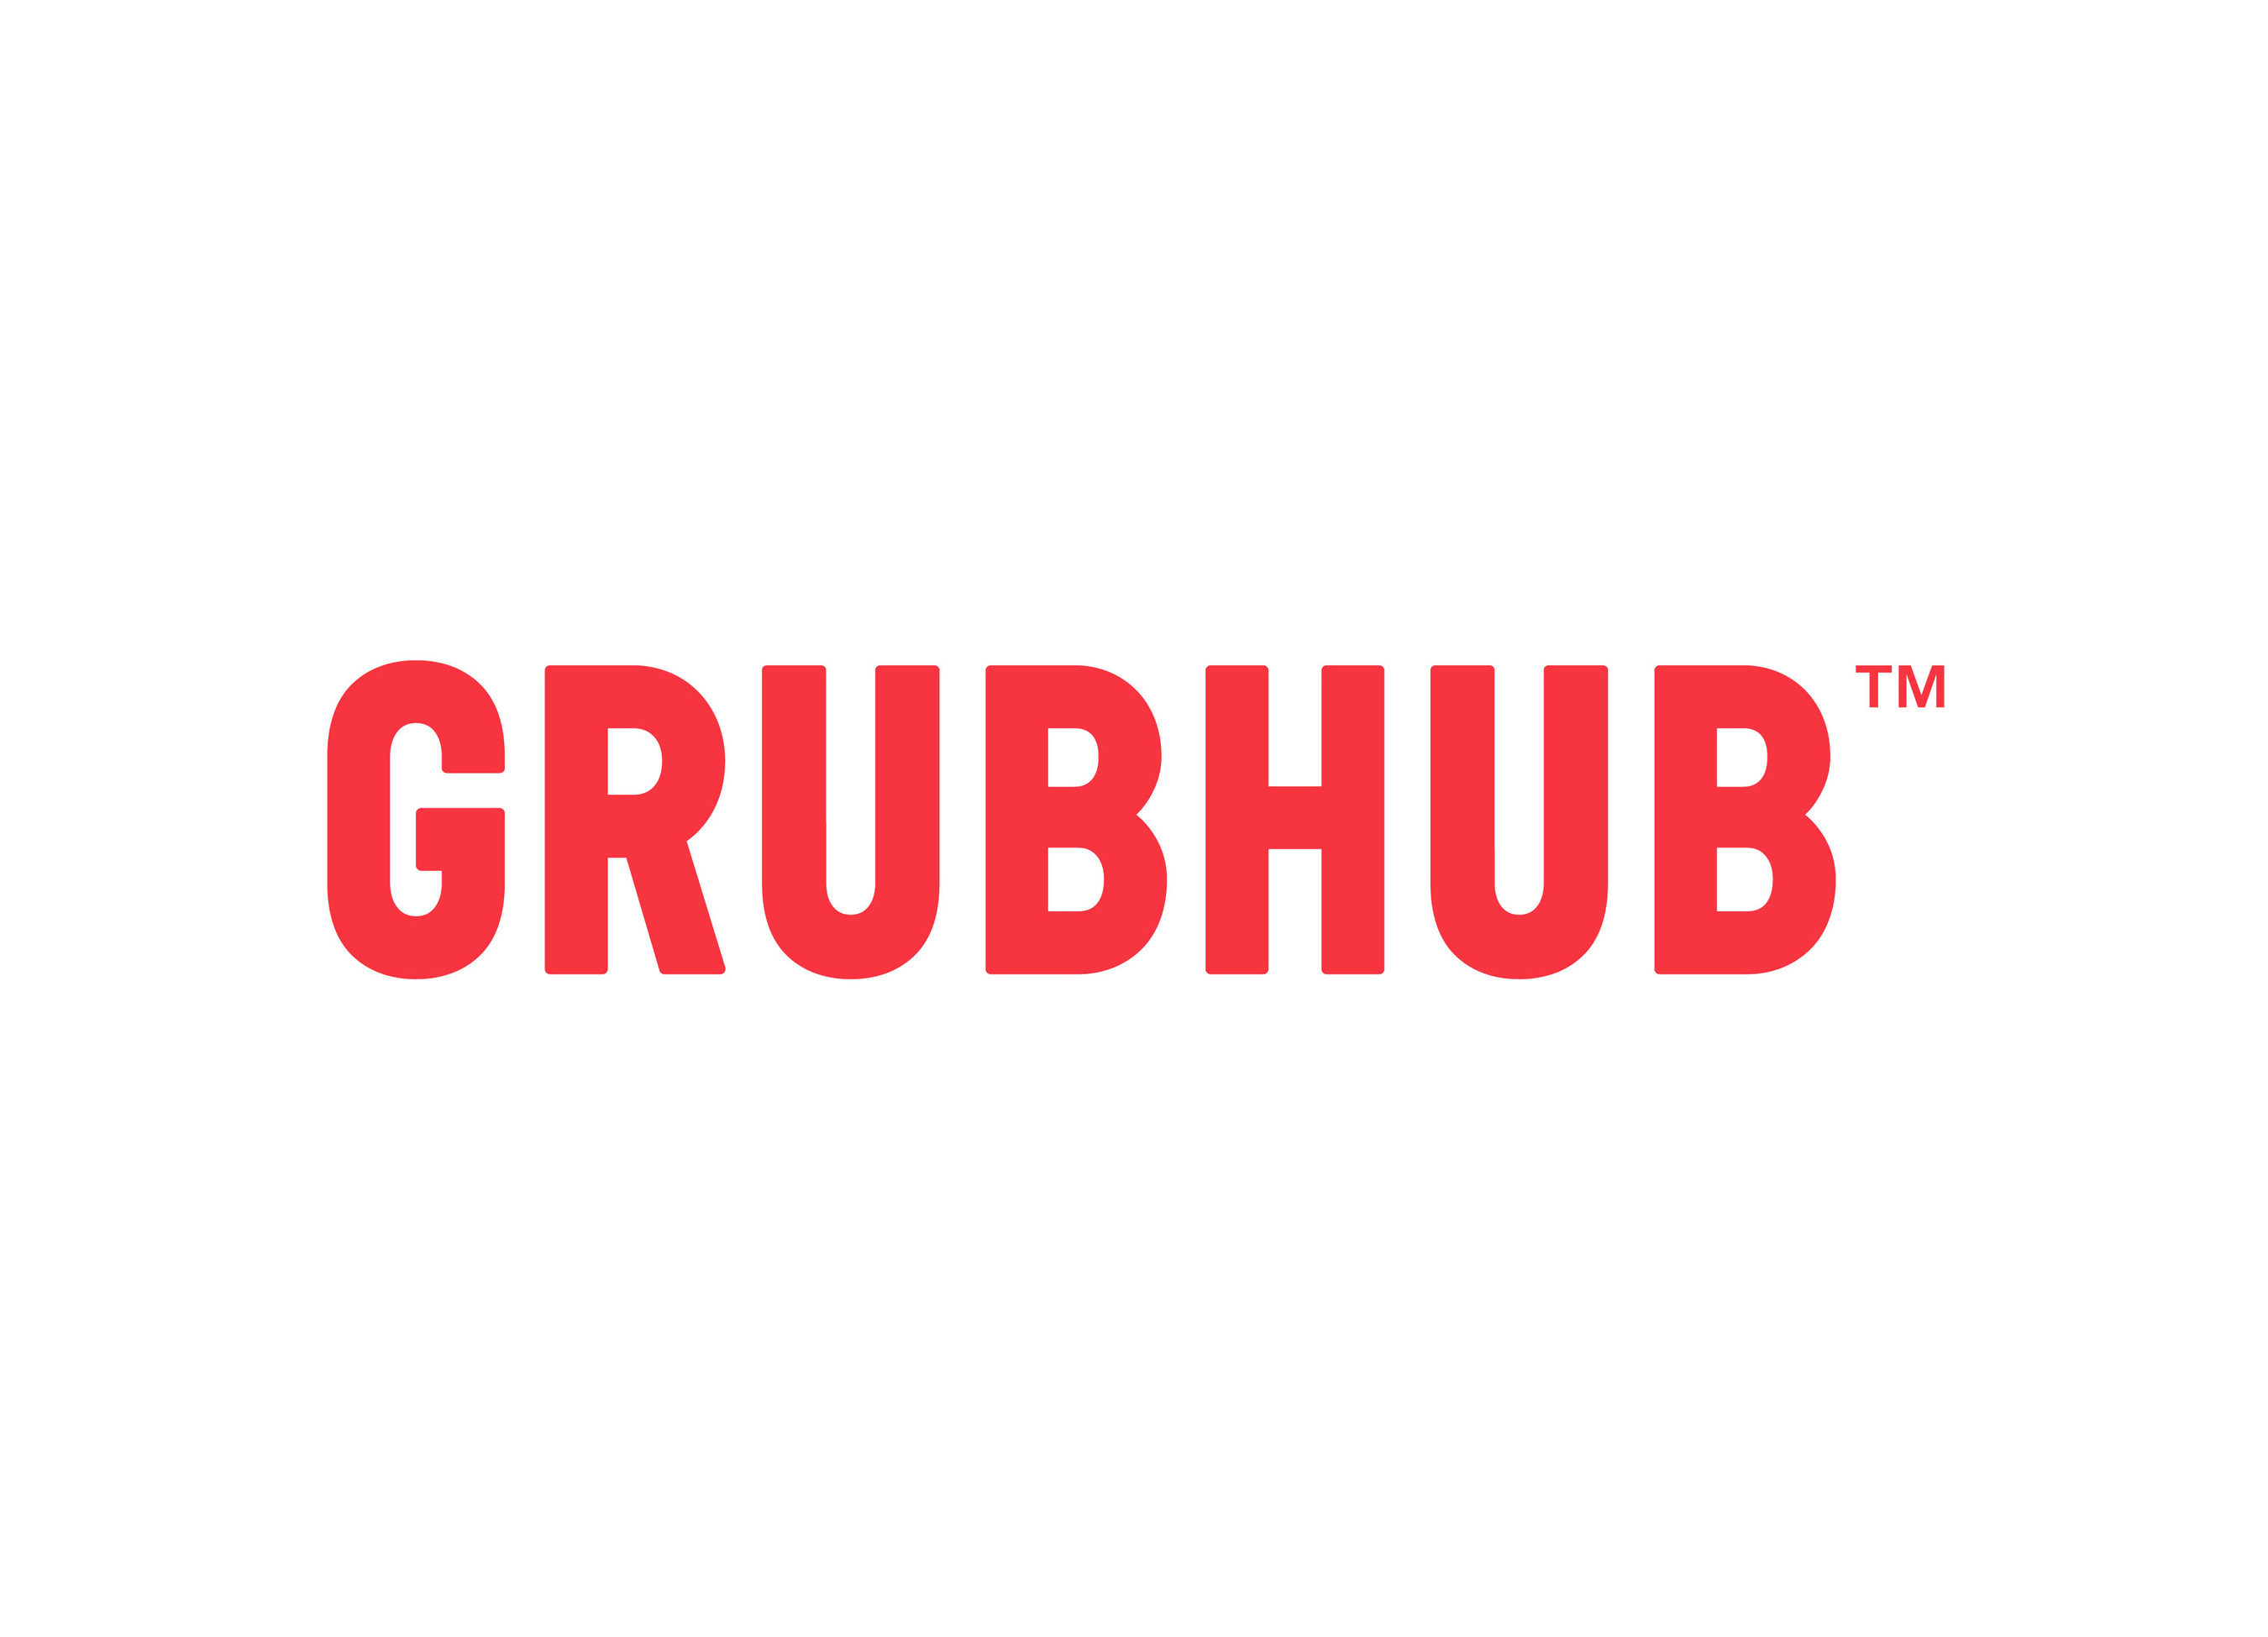 Grubhub’s relief plan does not include reducing restaurant fees